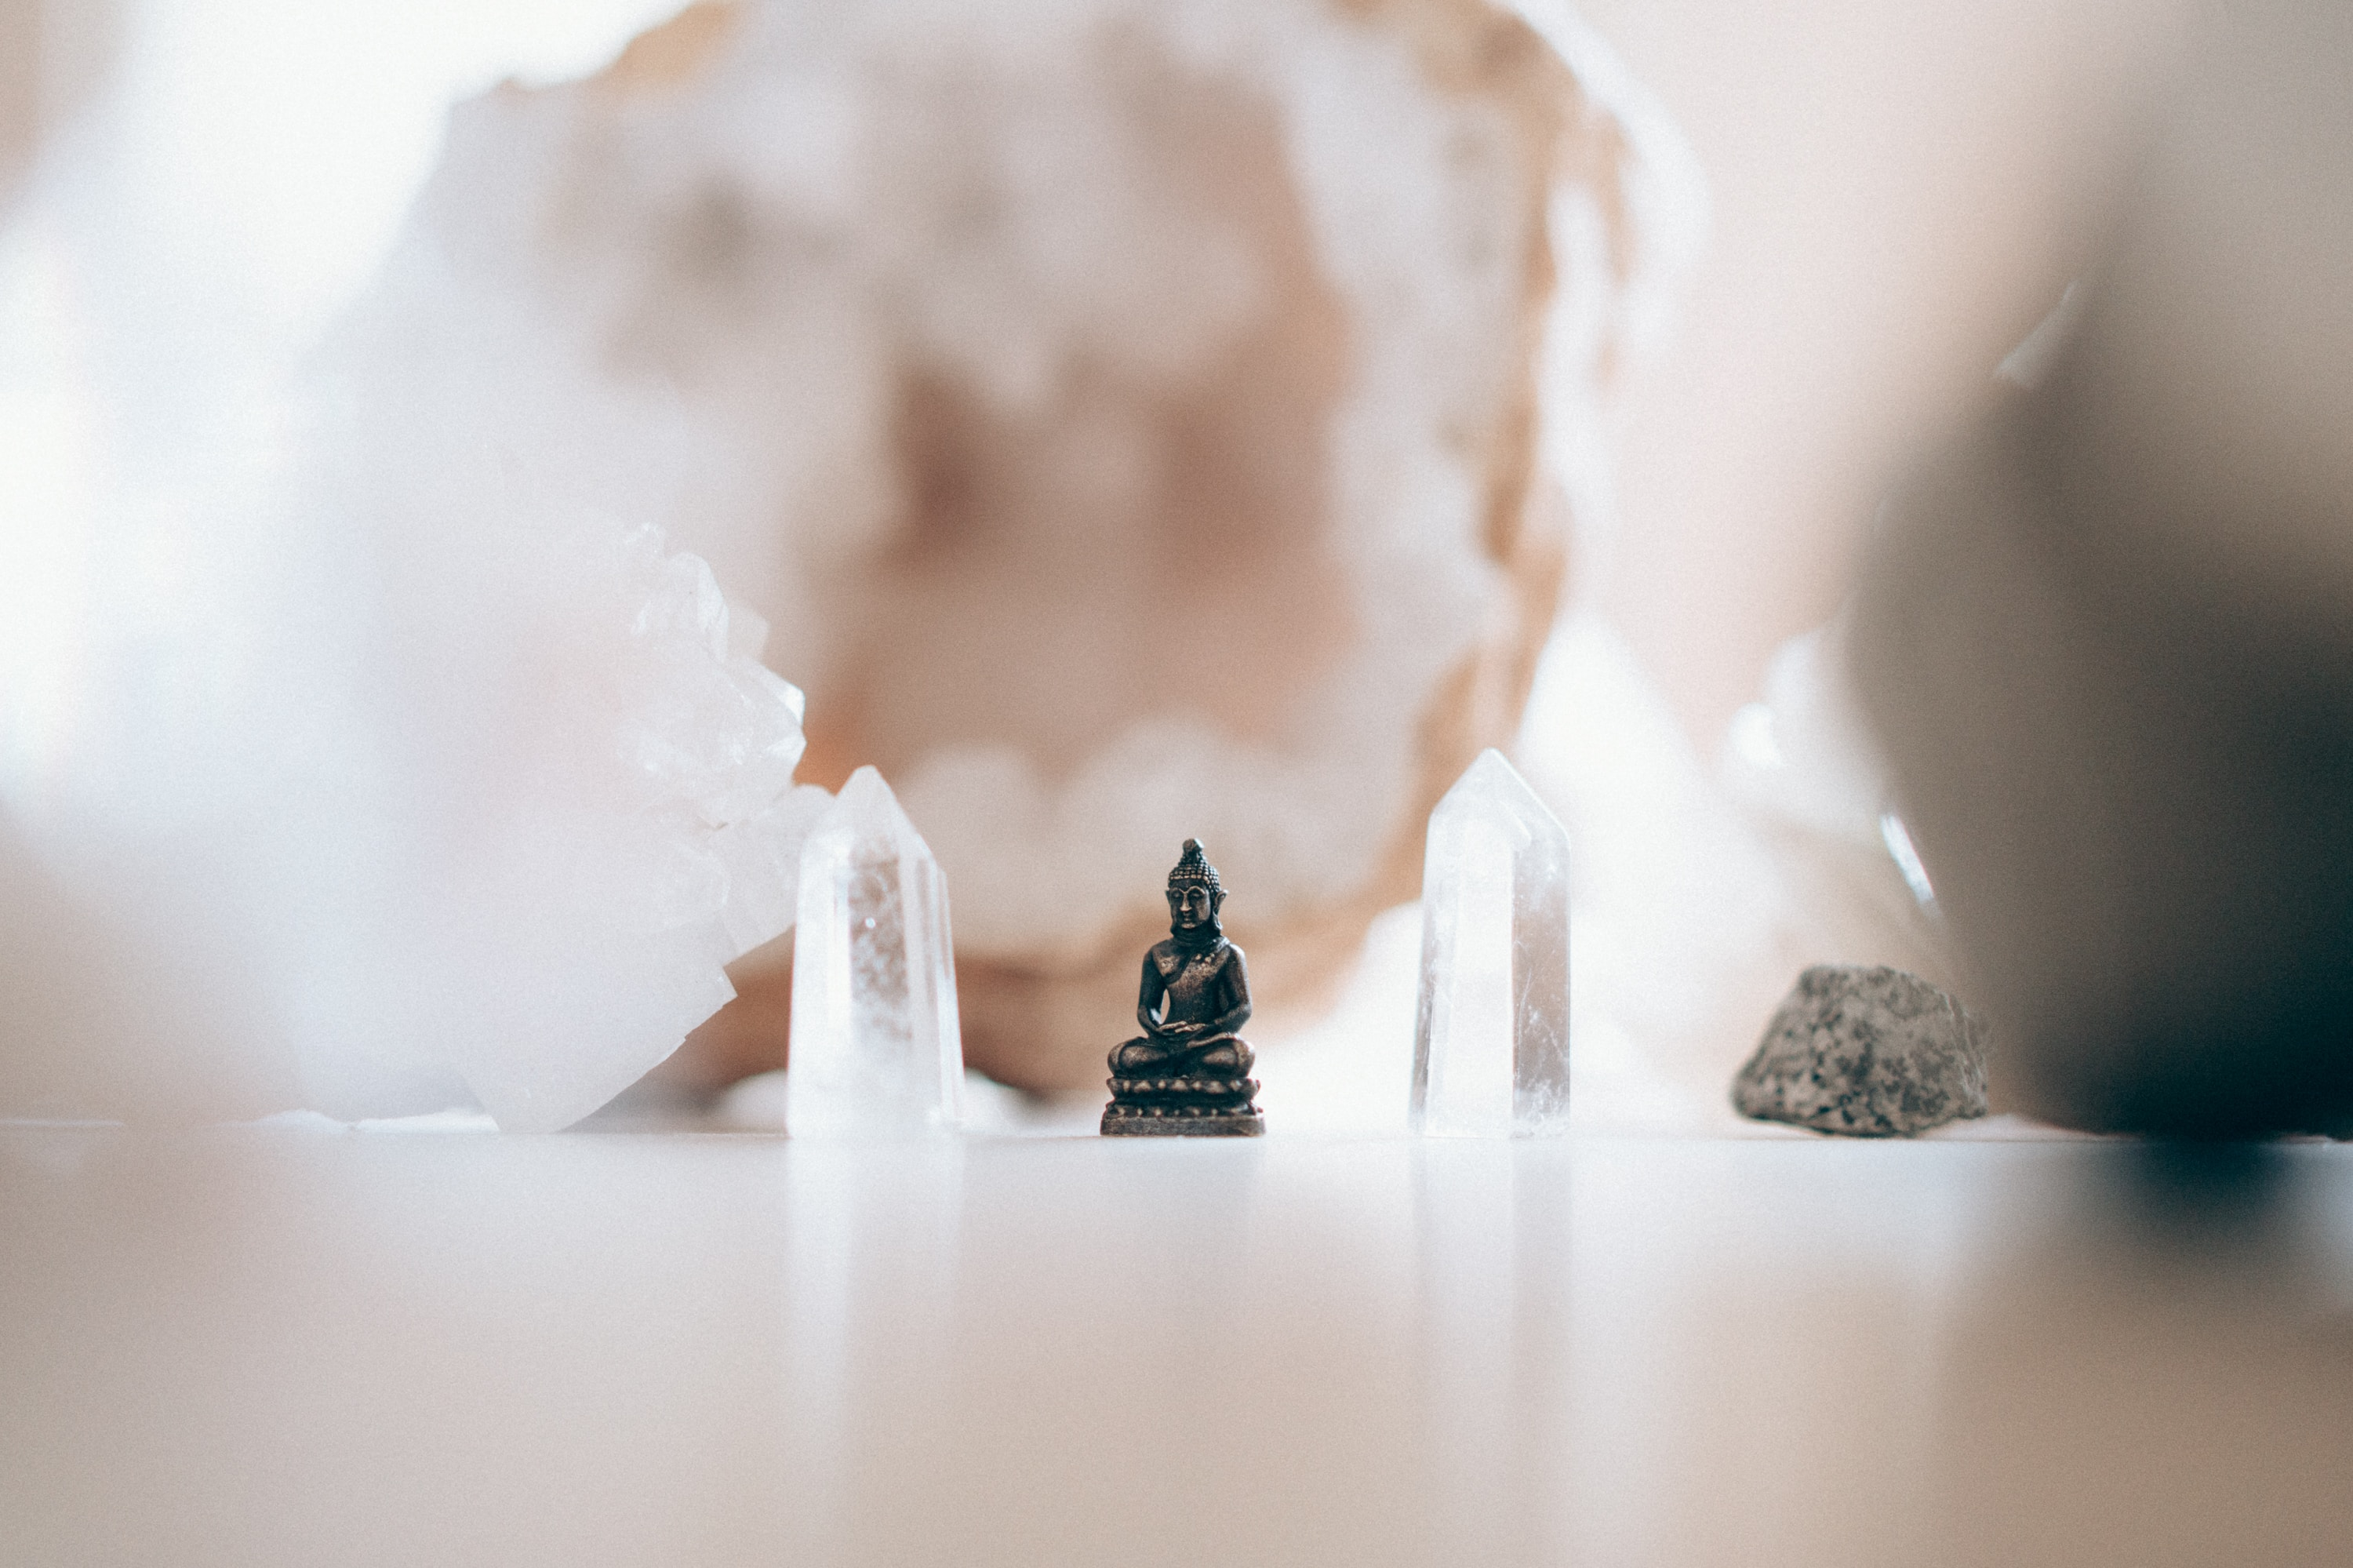 Crystals can help bring clarity and focus. Source: Unsplash, Samuel Austin.